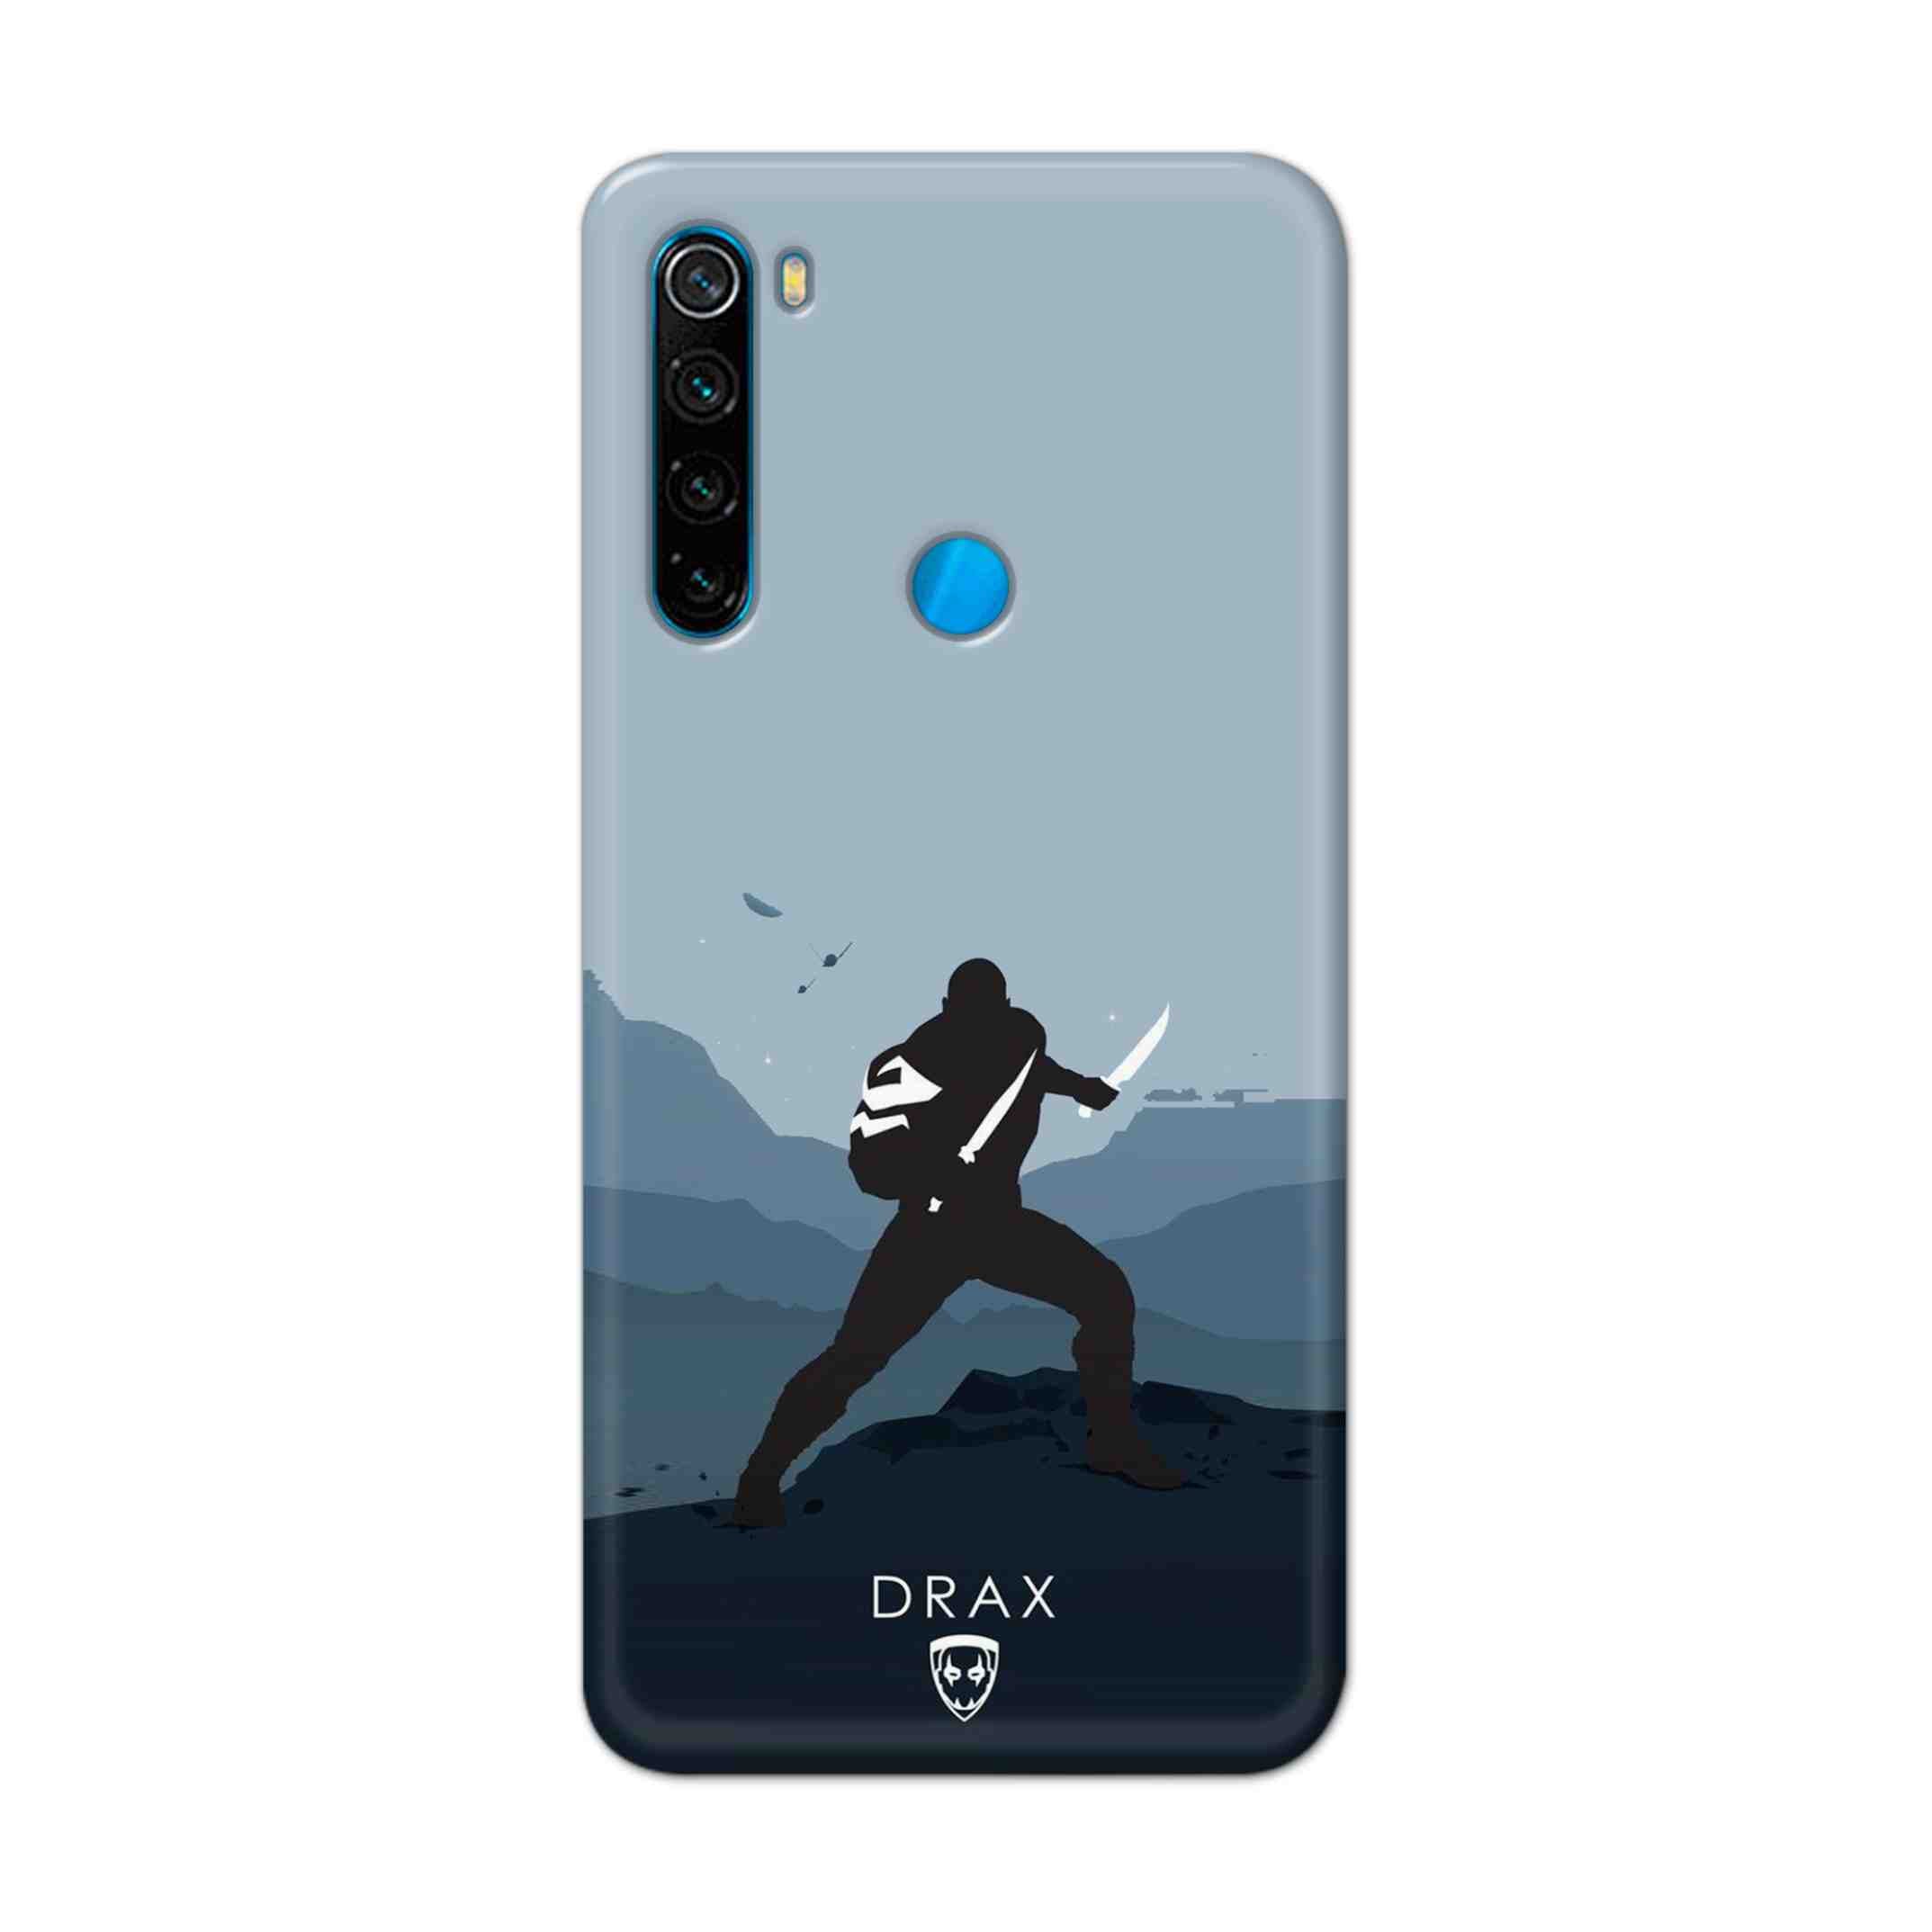 Buy Drax Hard Back Mobile Phone Case Cover For Xiaomi Redmi Note 8 Online